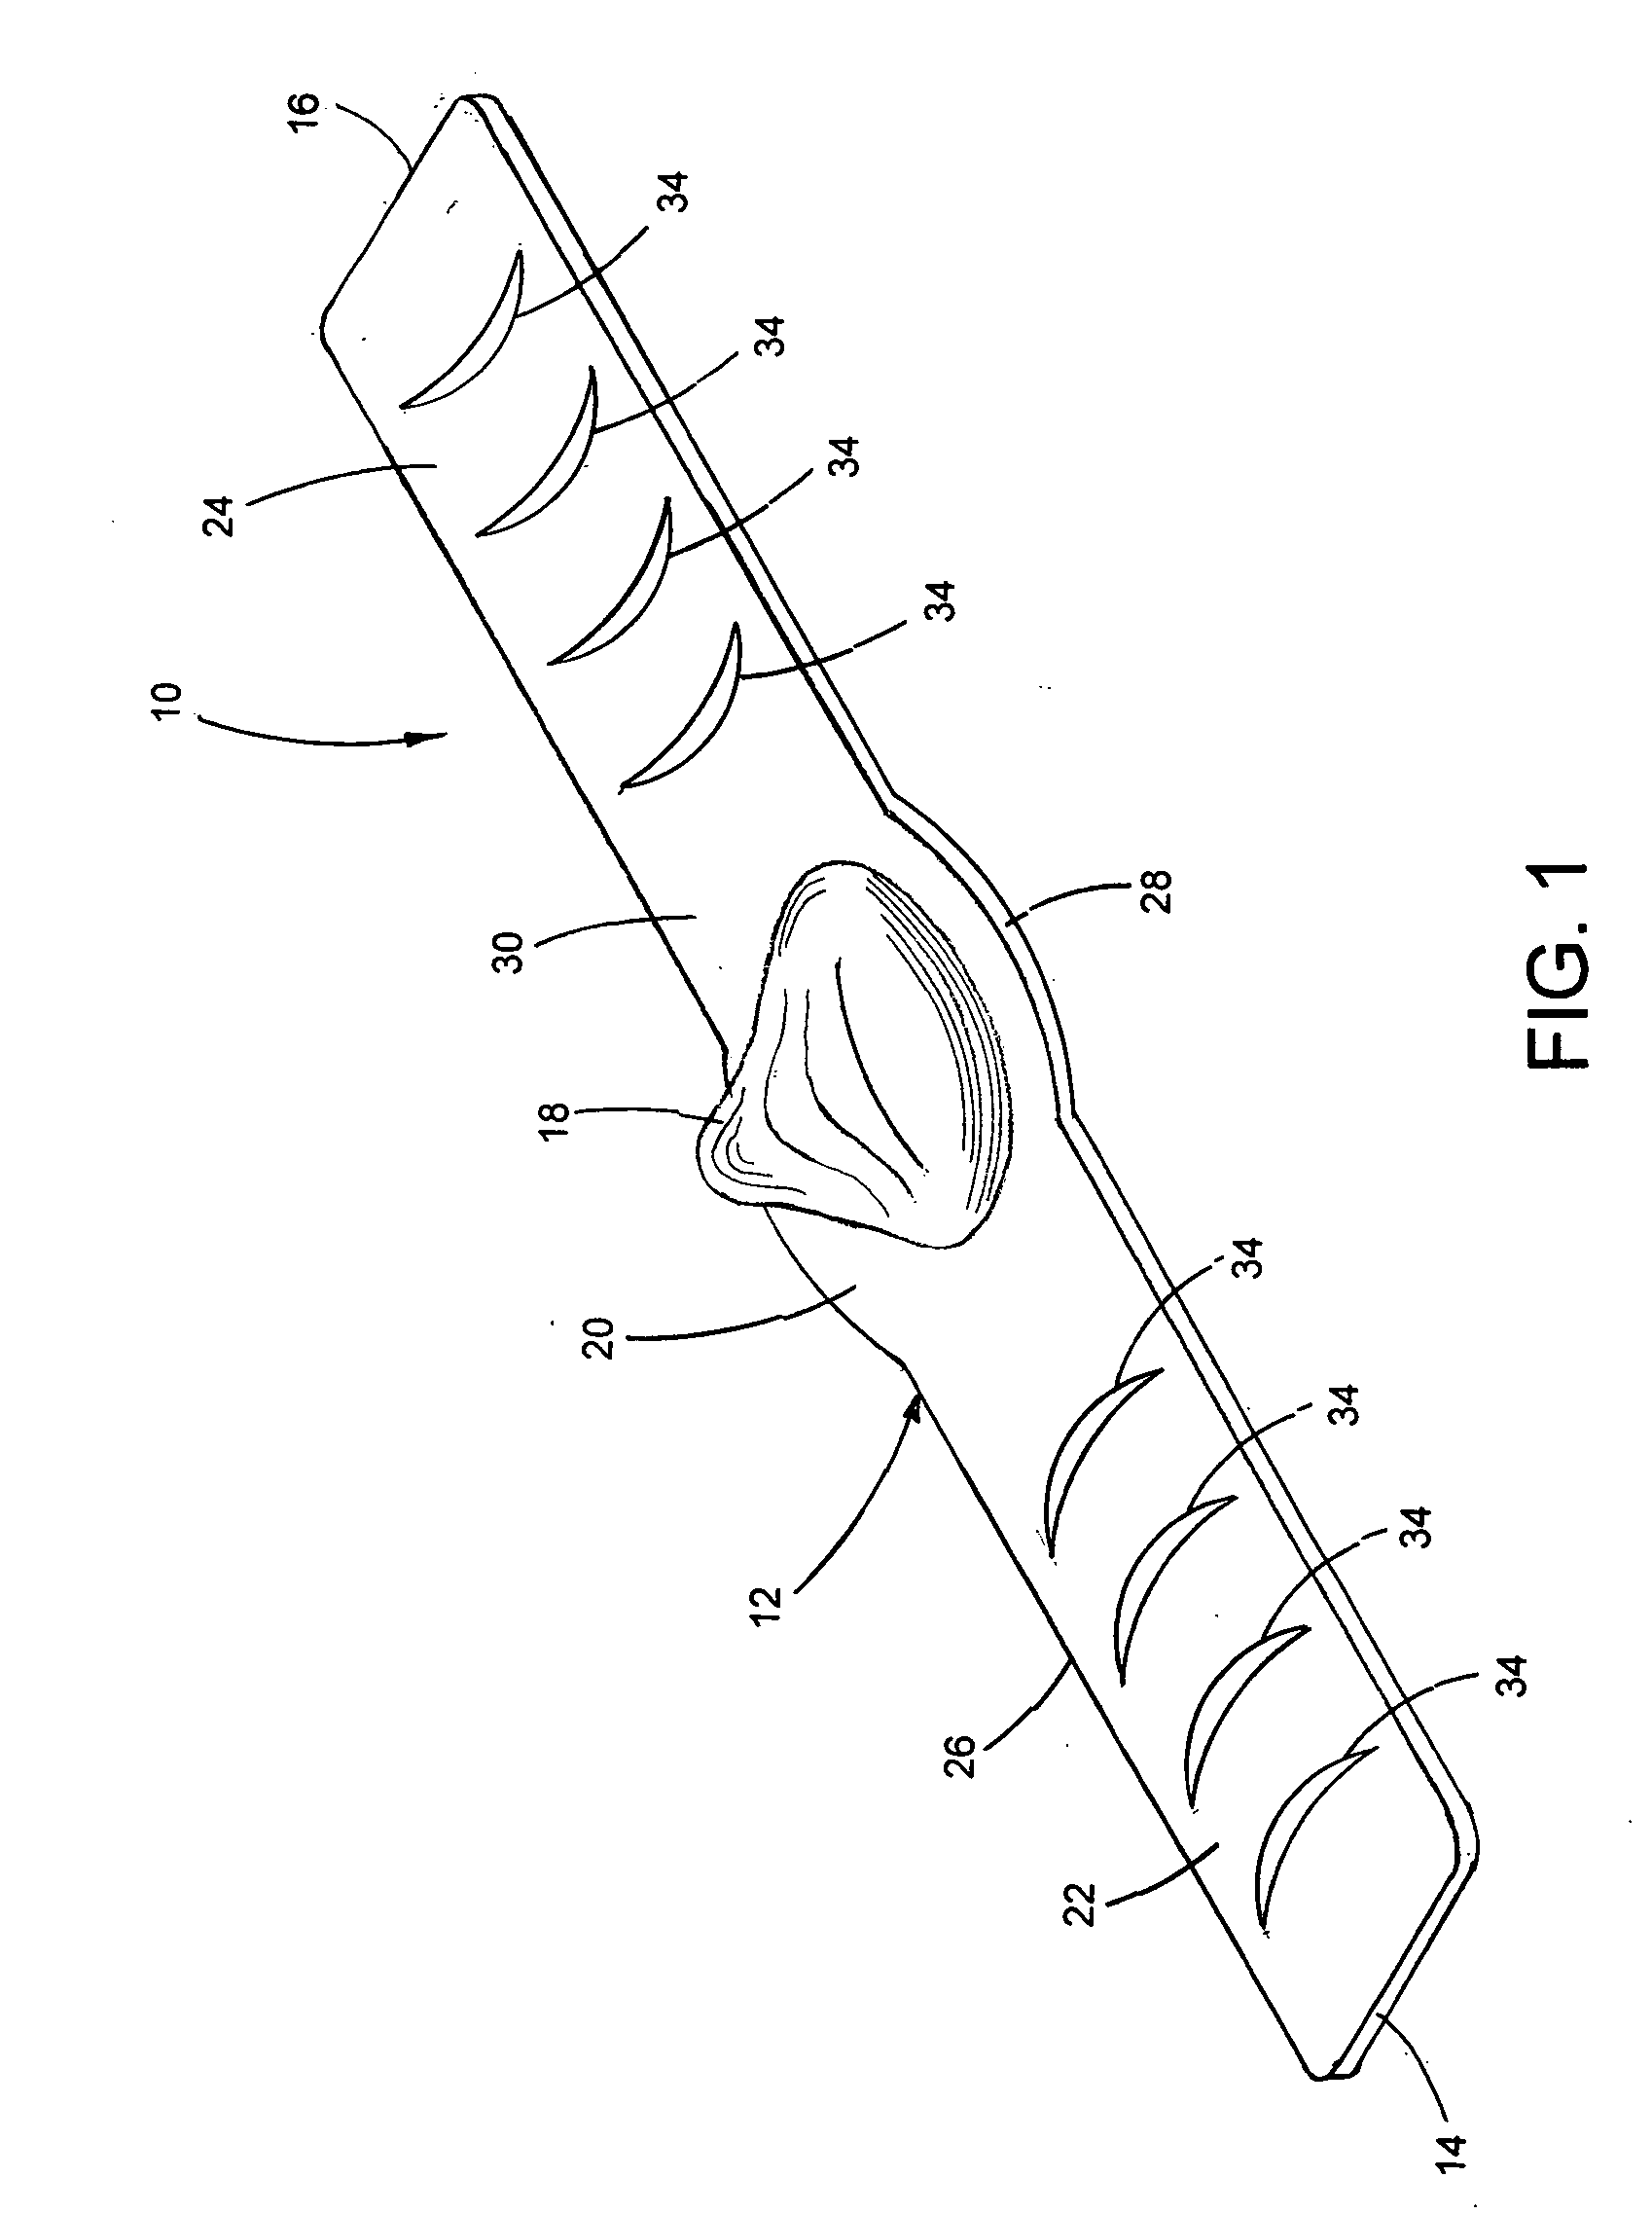 Device for facilitating performance of the Heimlich maneuver